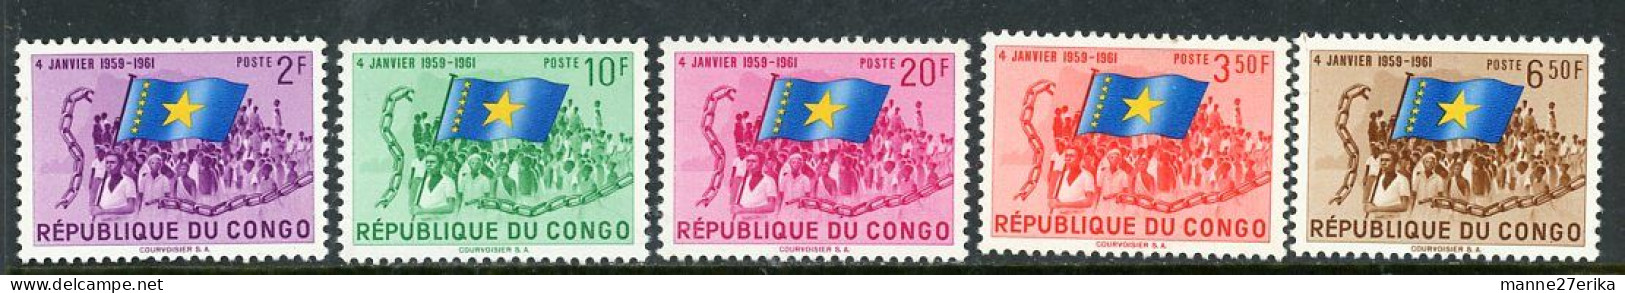 Congo 1961 MH - Mint/hinged